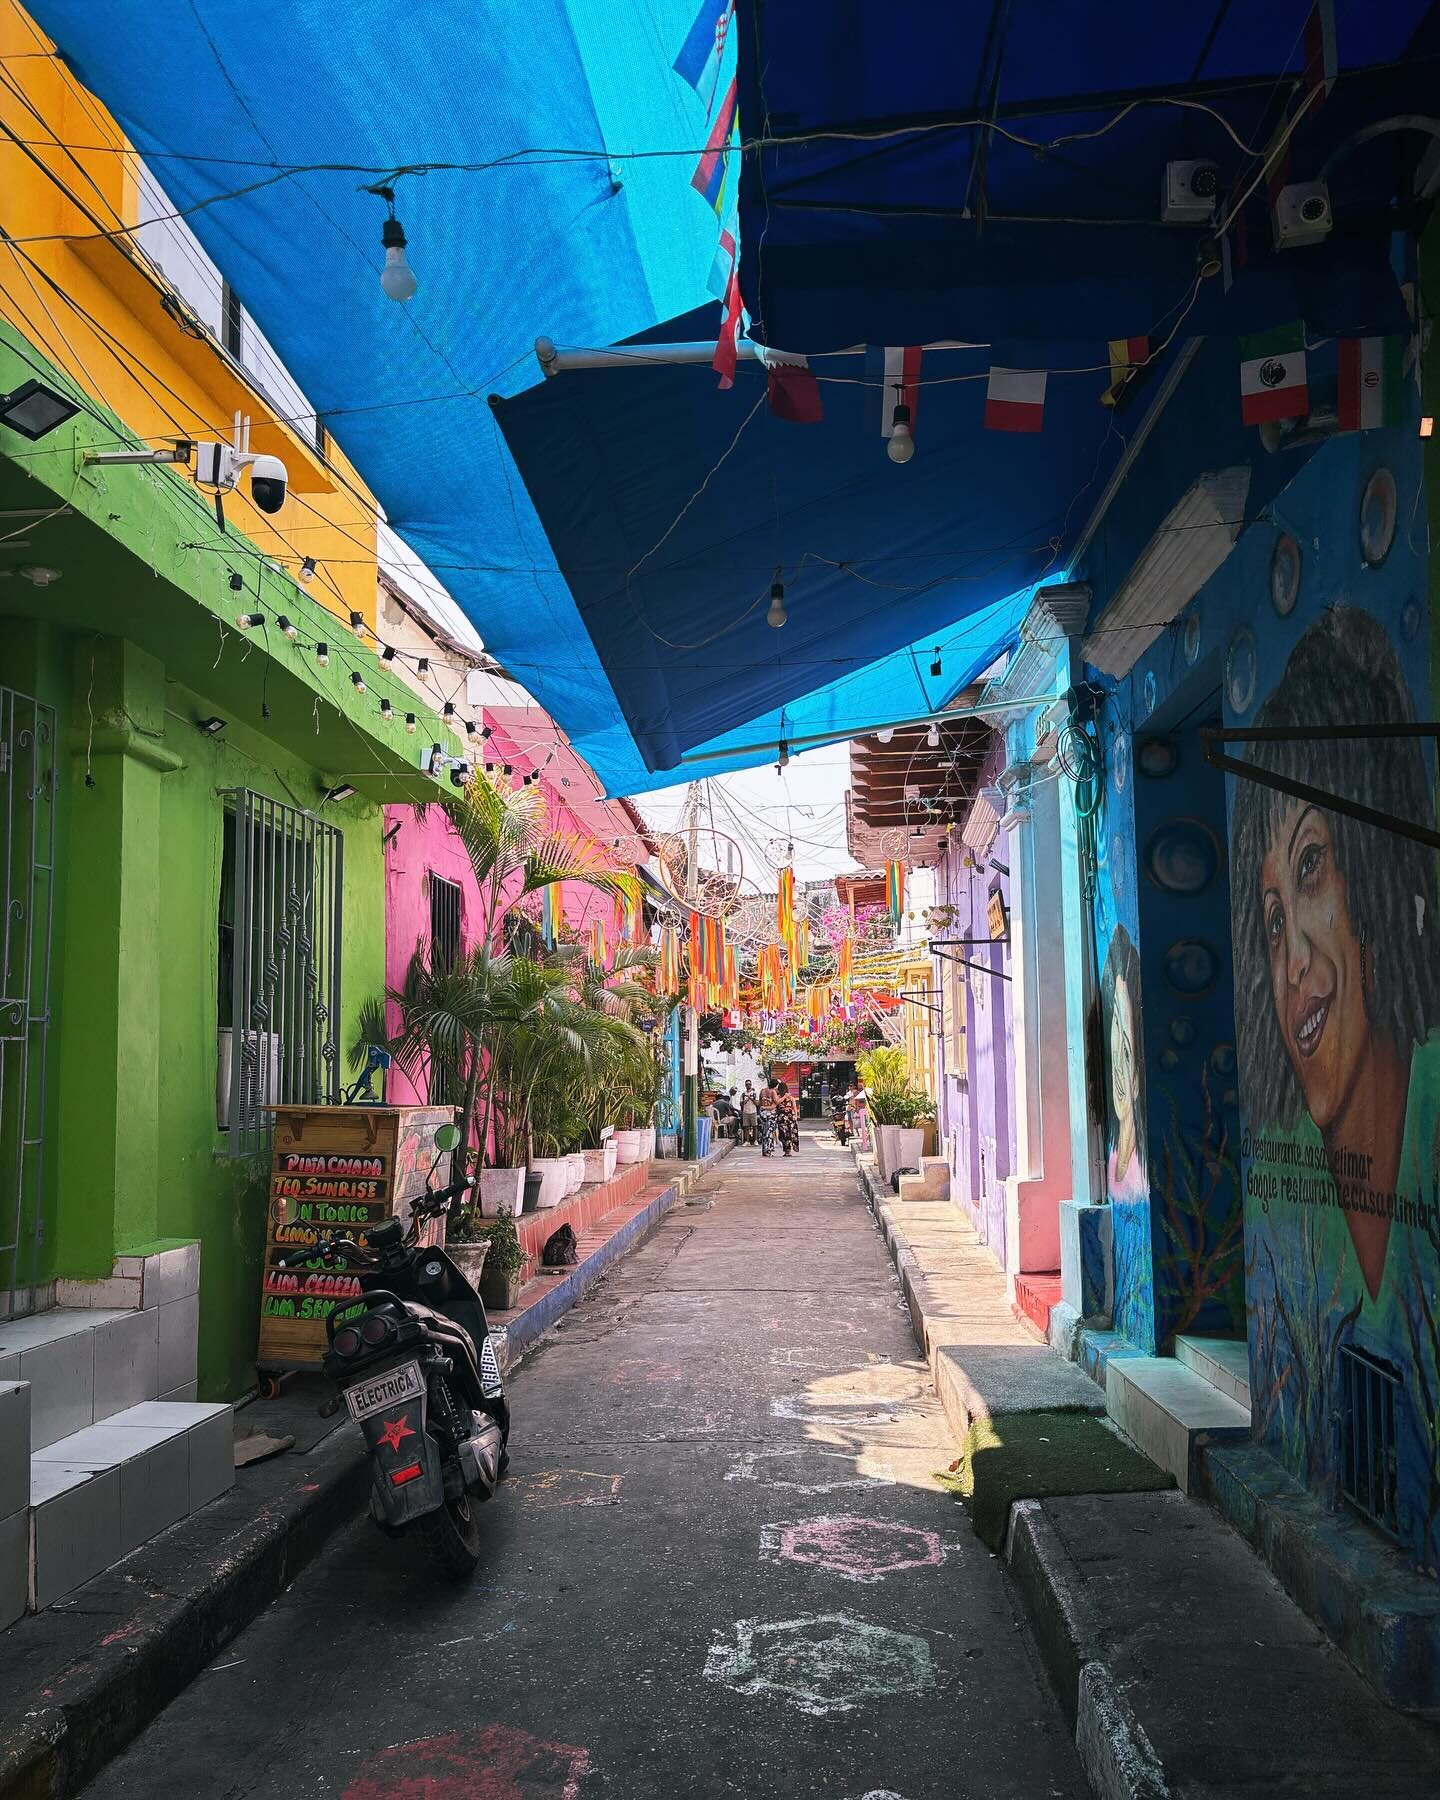 Buenos dias! The shapes and colors in this town are amazing.